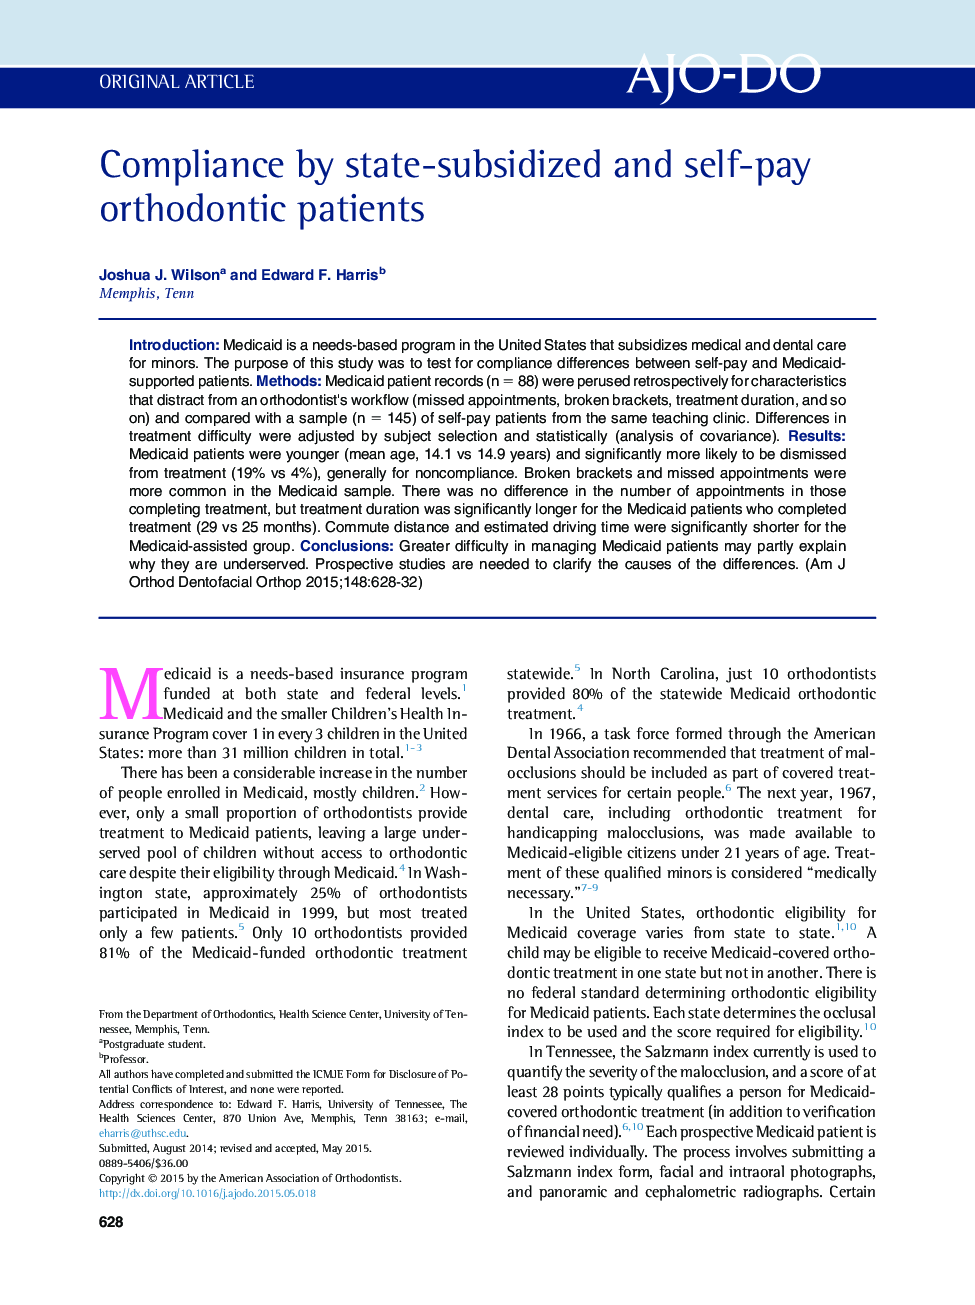 Compliance by state-subsidized and self-pay orthodontic patients 